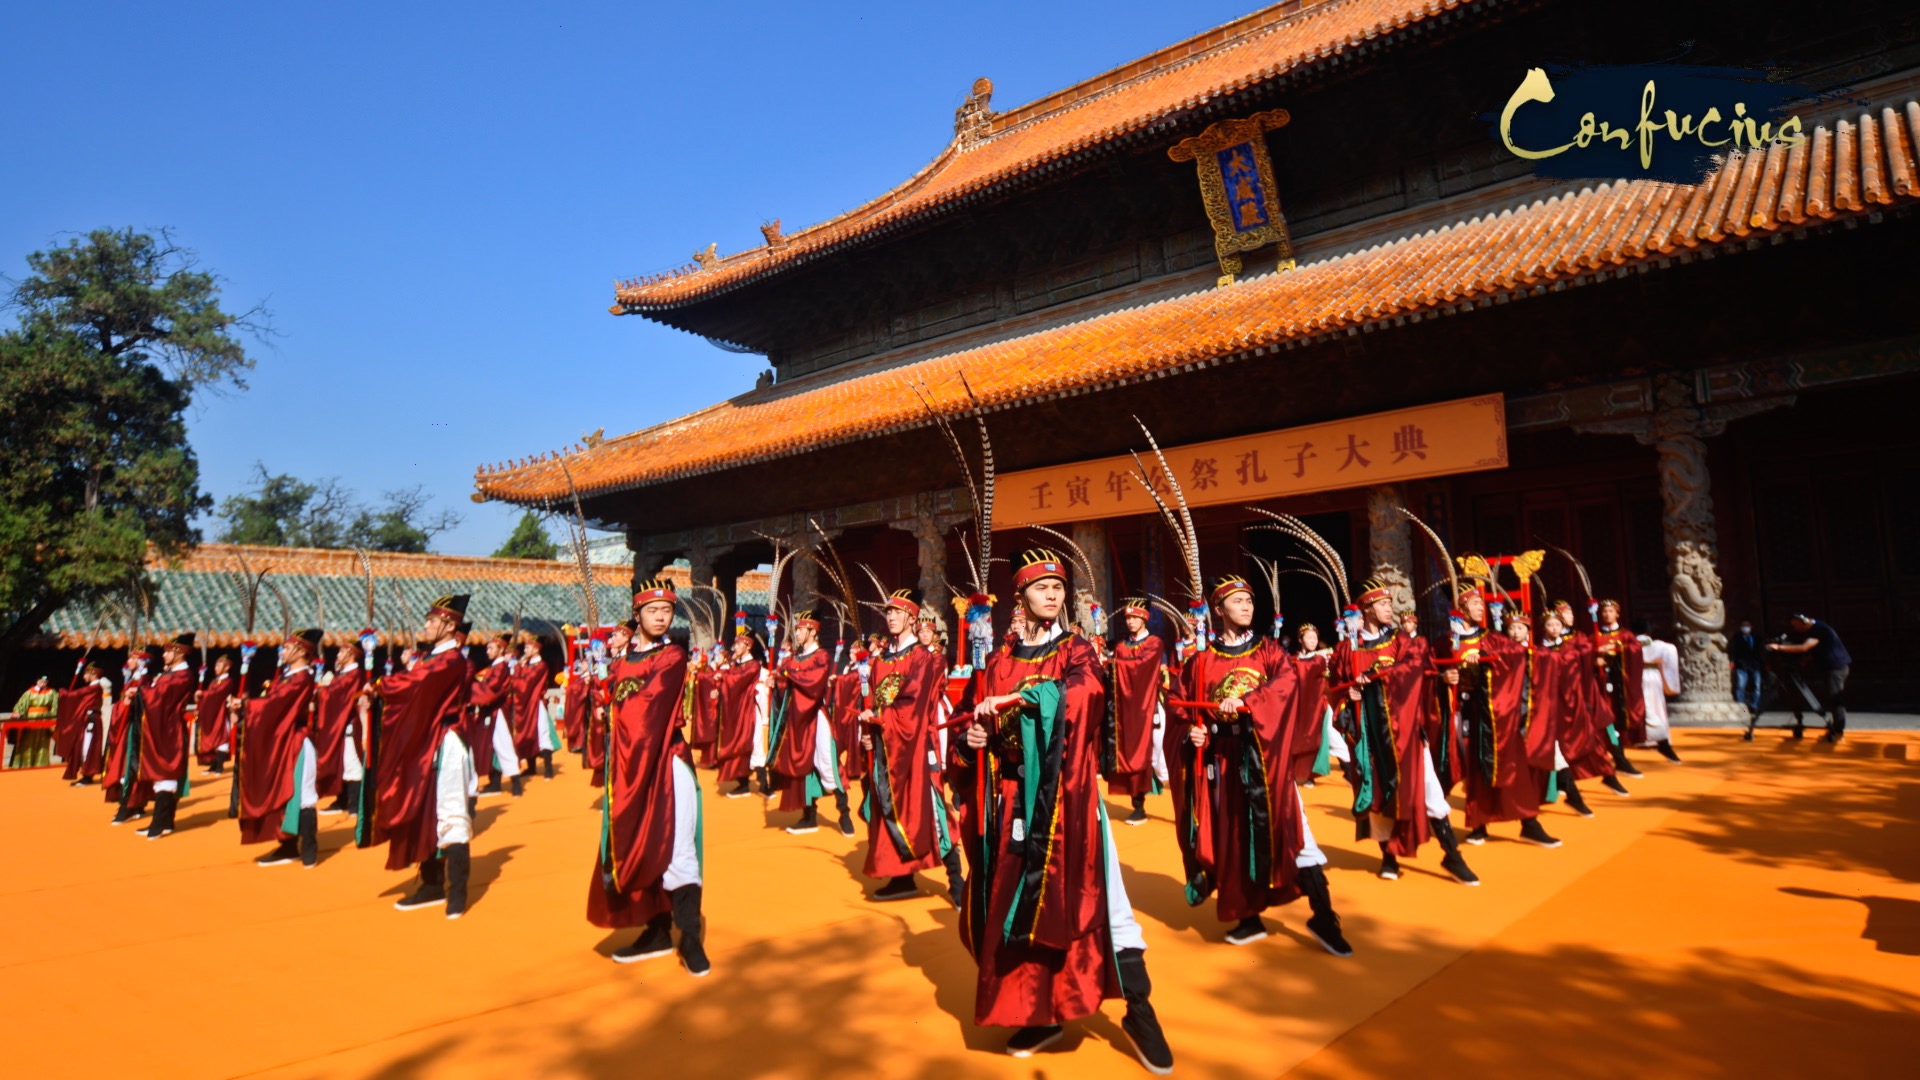 Watch the Grand Ceremony of Worship of Confucius CGTN